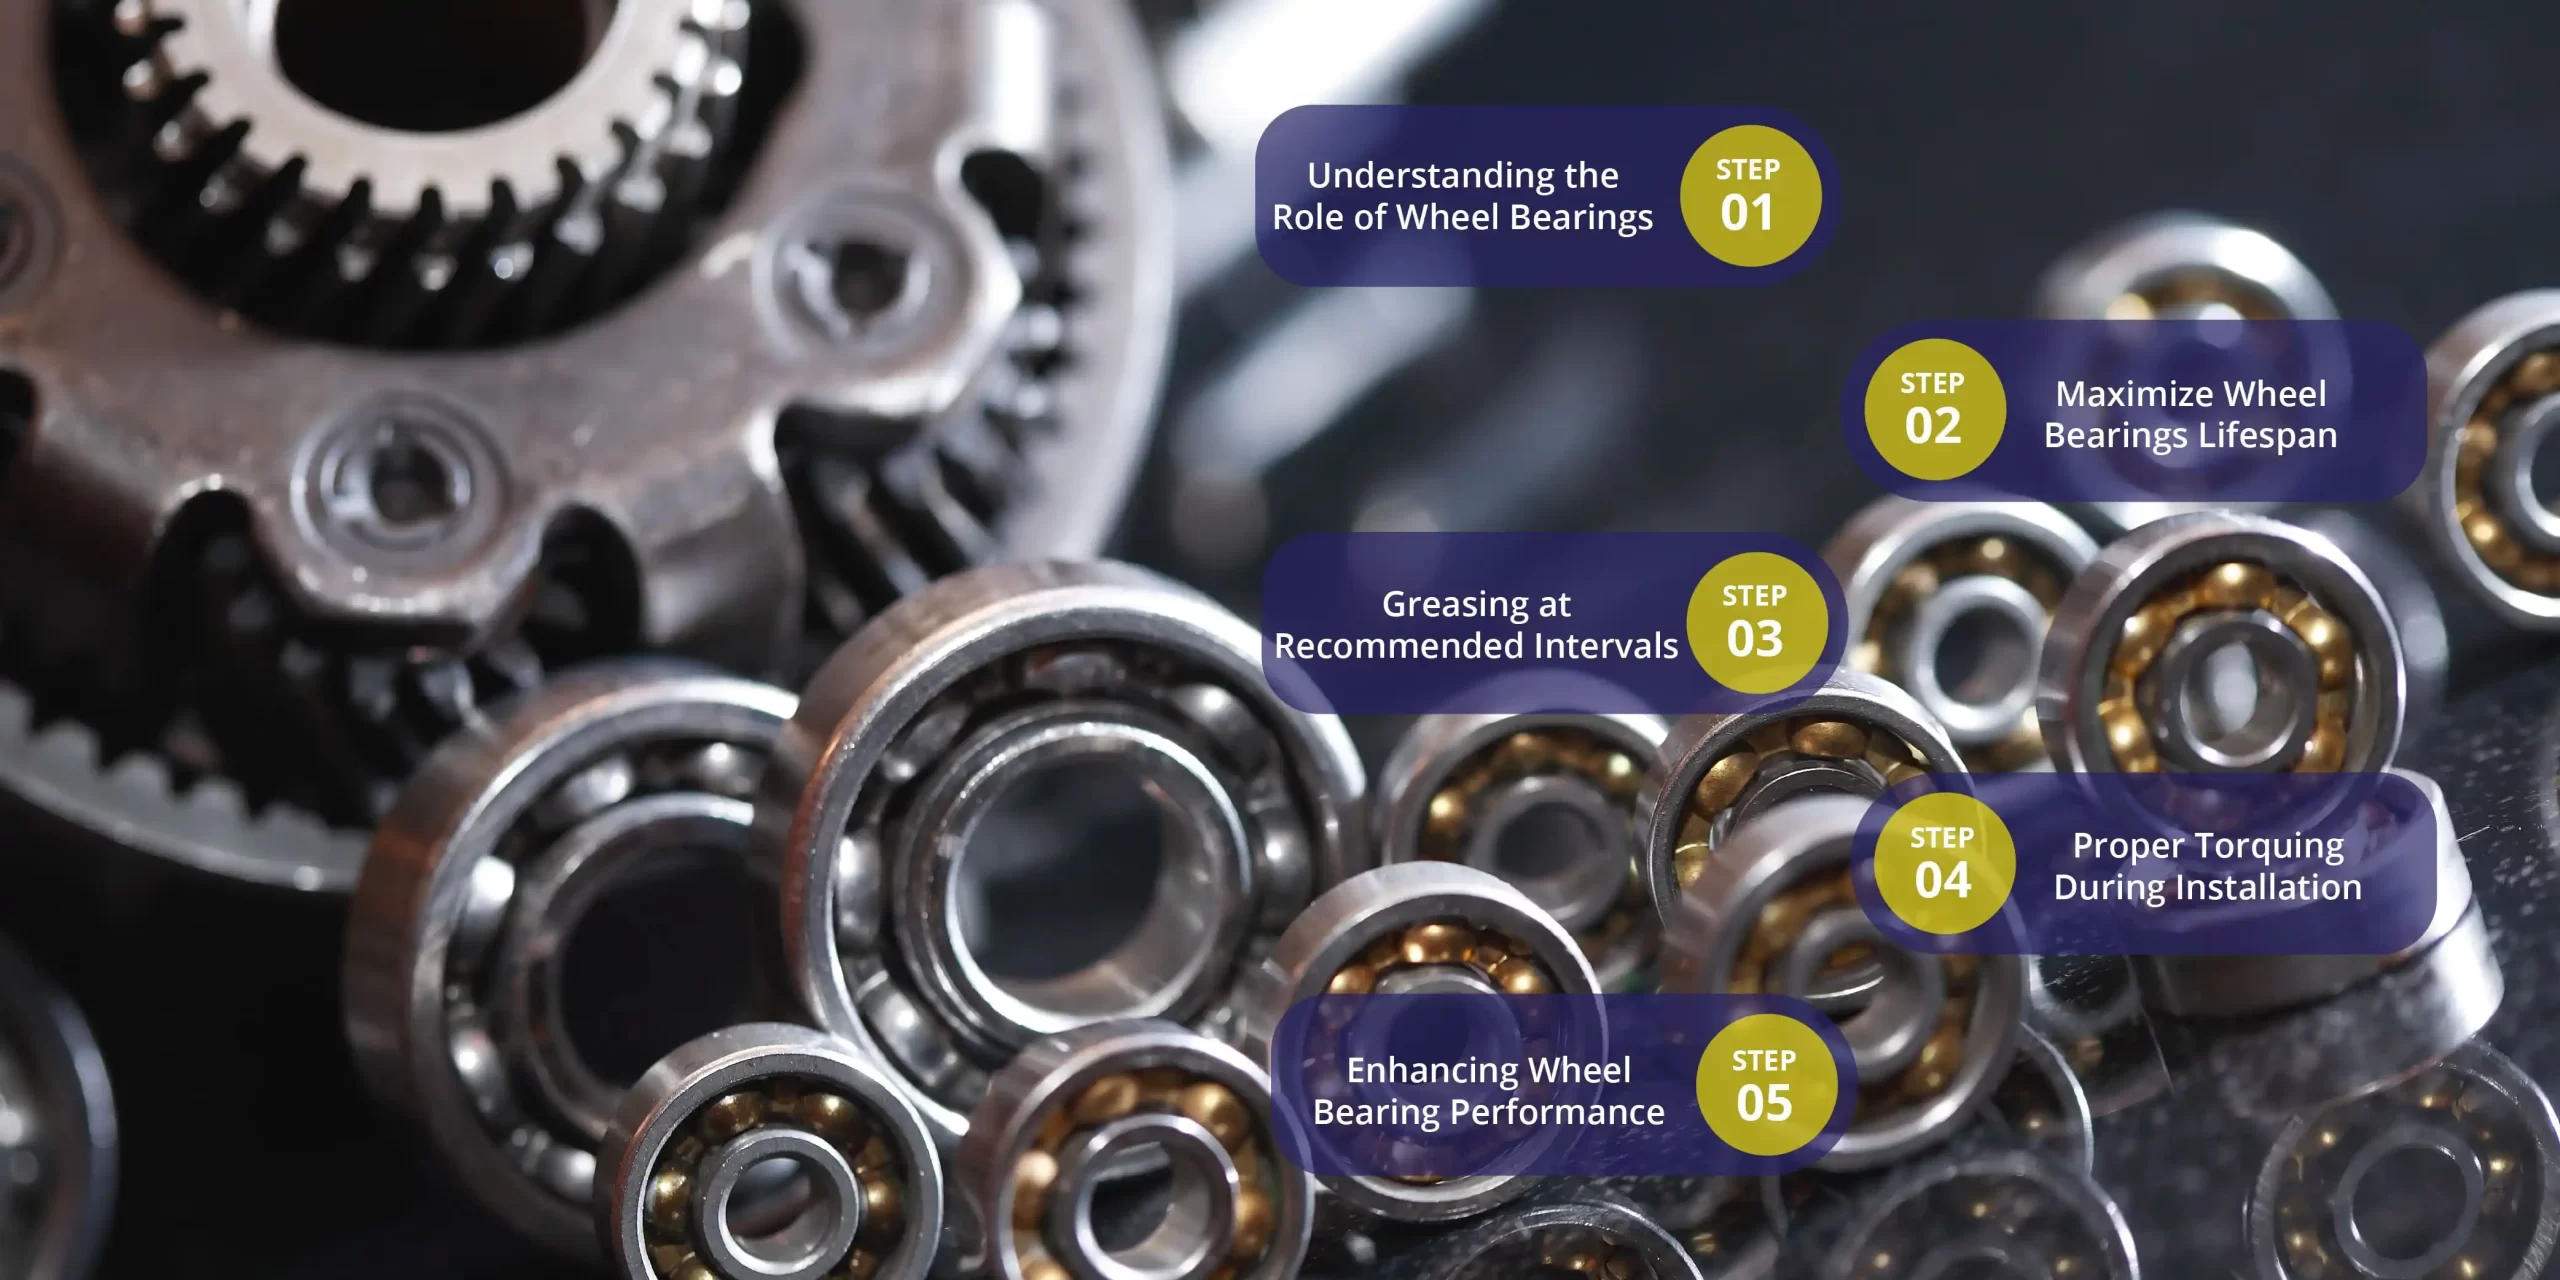 5 Steps to Optimize Your Wheel Bearings